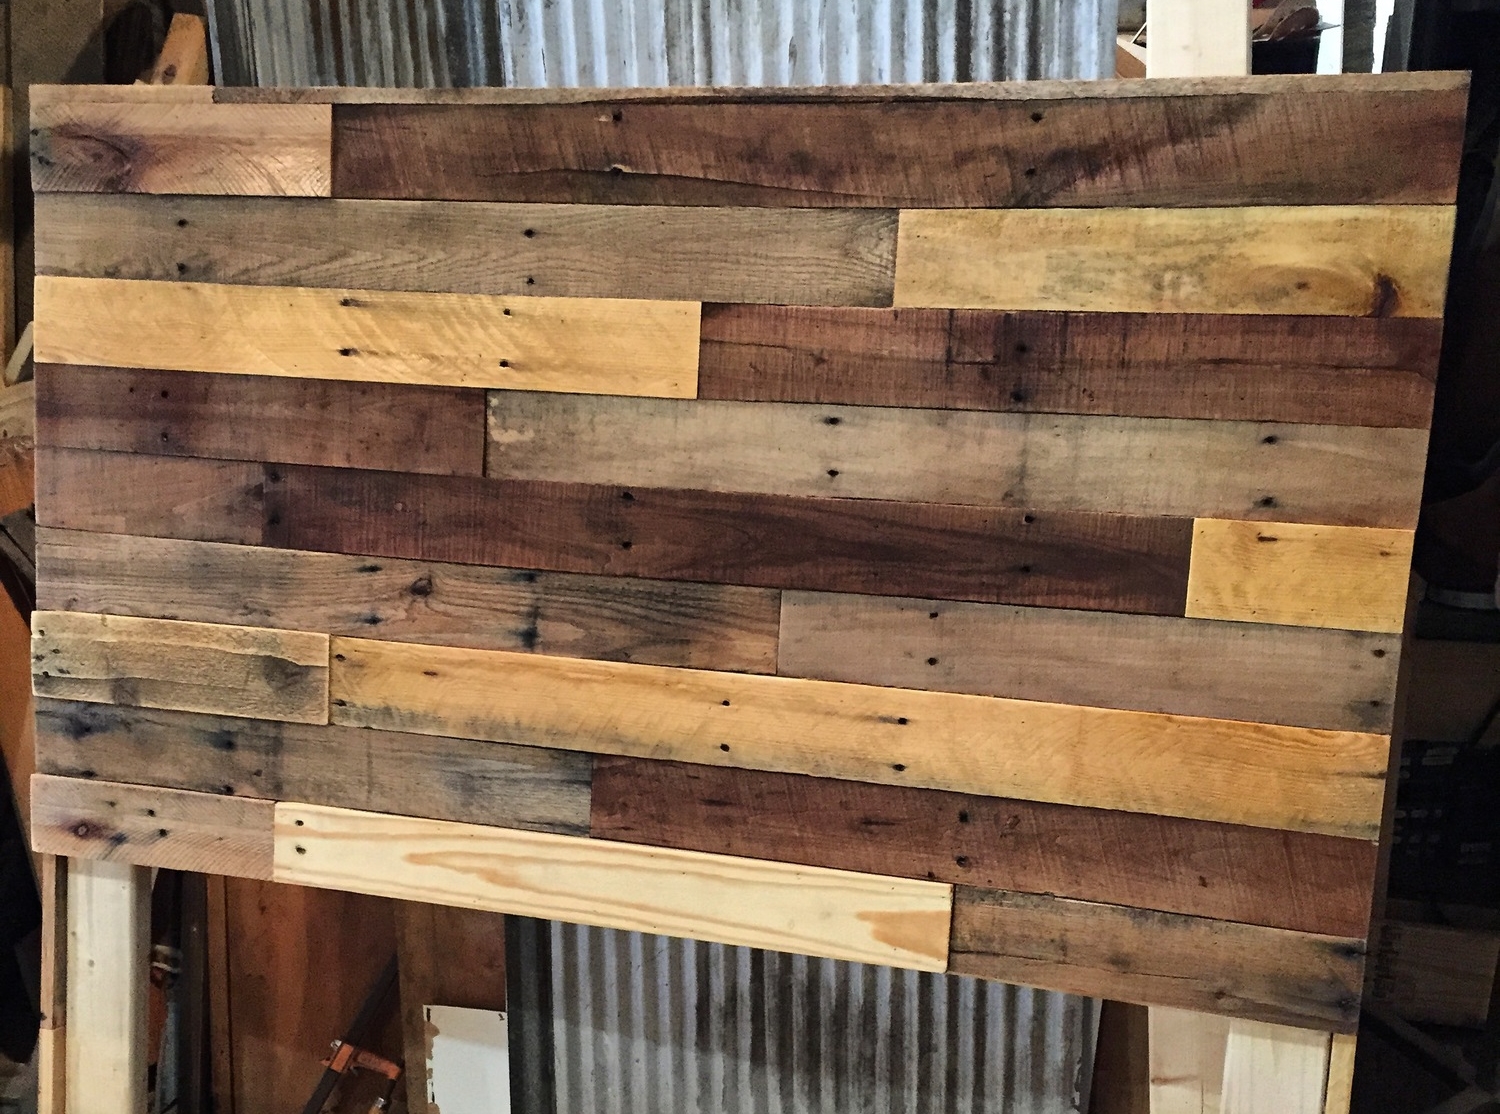 Pallet Wood Headboard Diy Revival, How To Make A Double Bed Frame Out Of Pallets